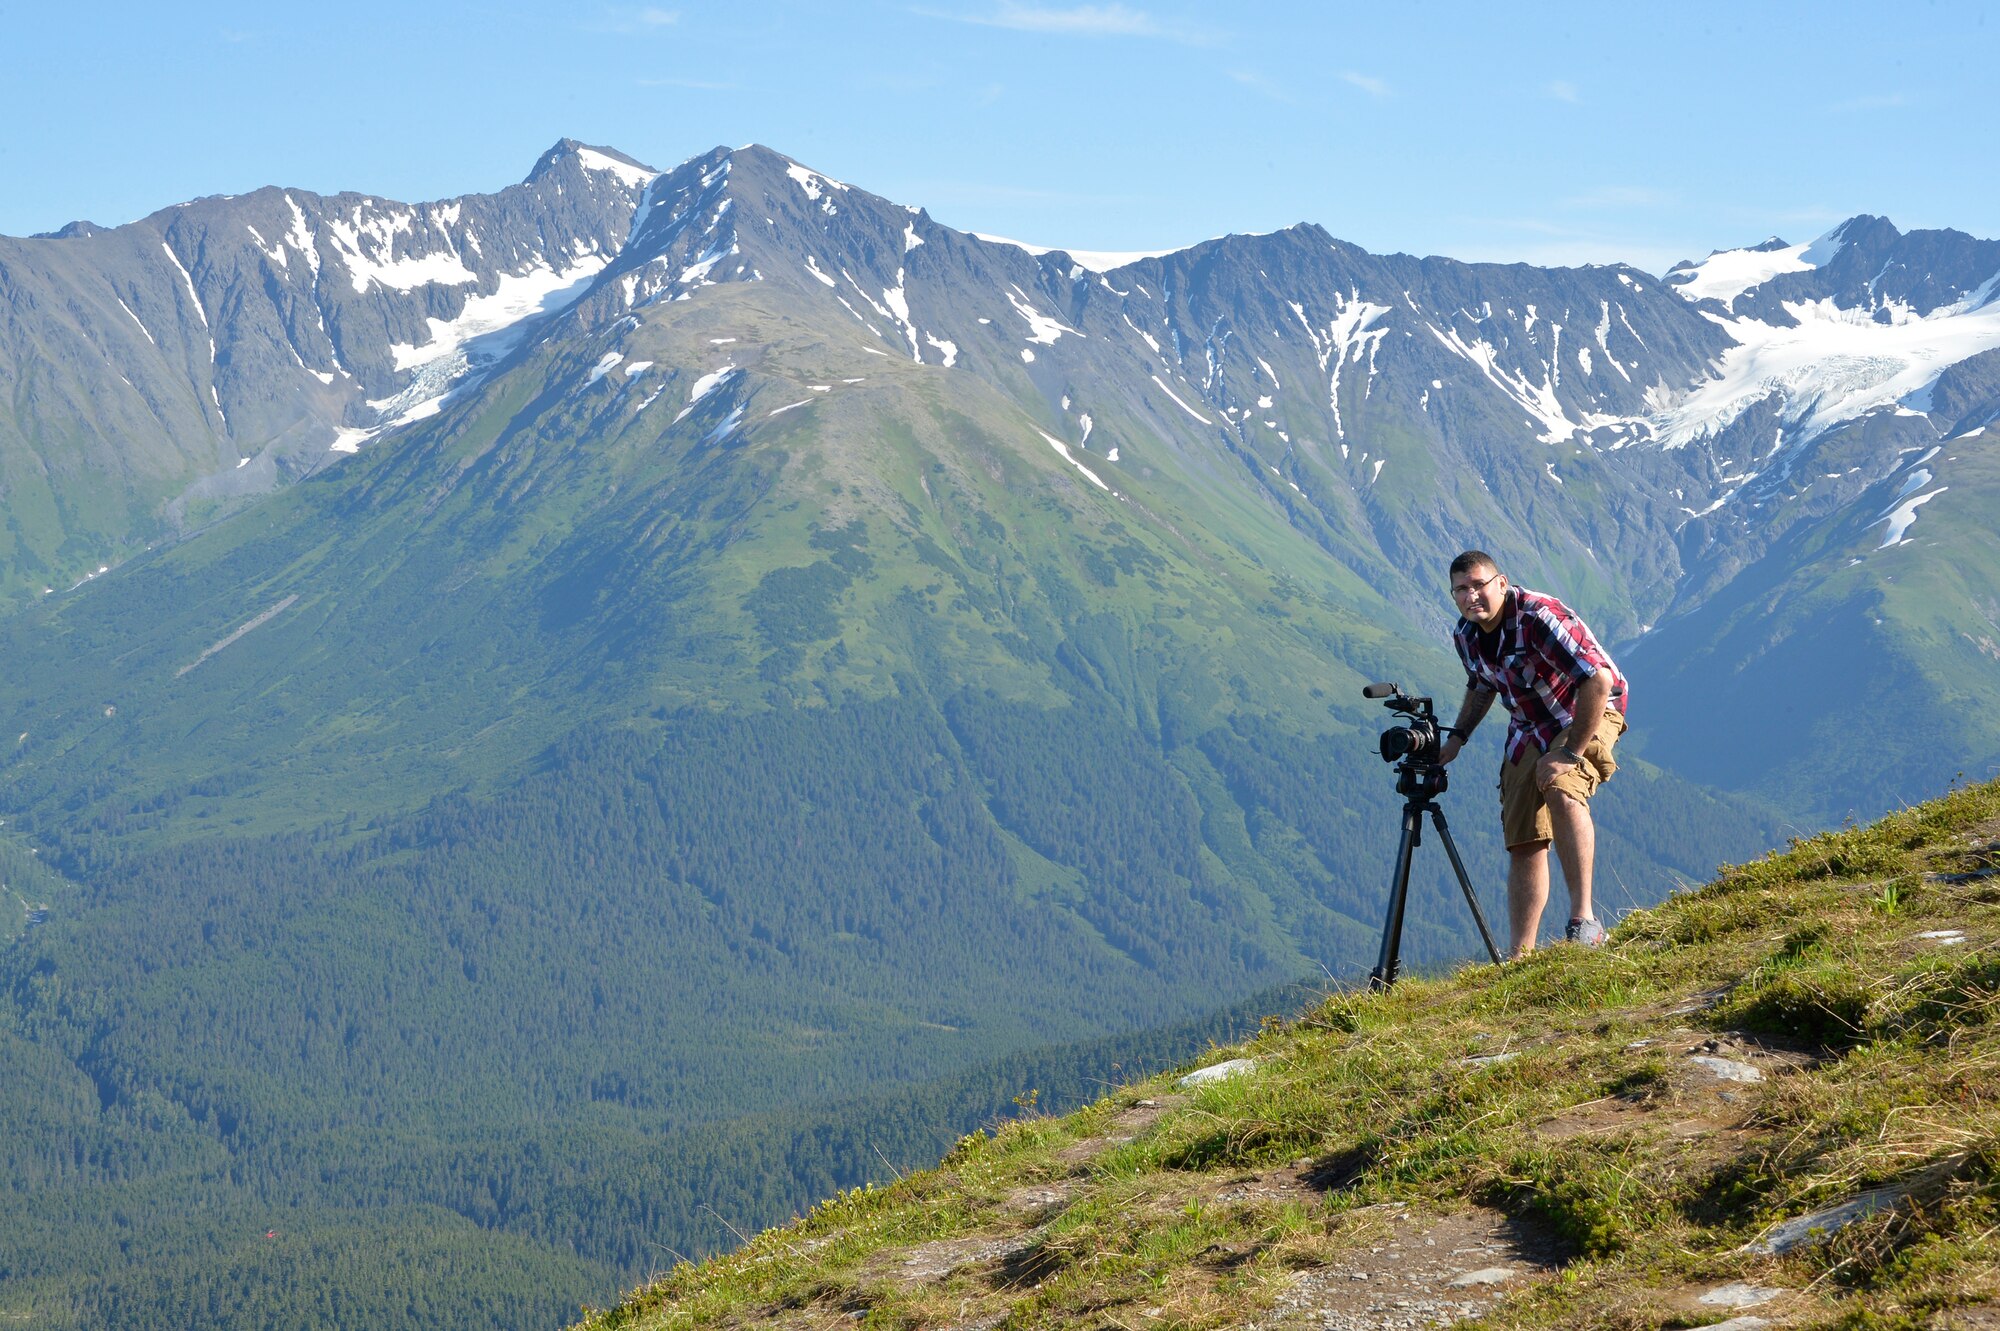 Tech. Sgt. Erik Gallion, a public affairs broadcaster assigned to the I.G. Brown Training and Education Center, pauses while filming lanscapes, July 12, 2016, in Alyeska Alaska. (U.S. Air National Guard photo by Master Sgt. Jerry D. Harlan)